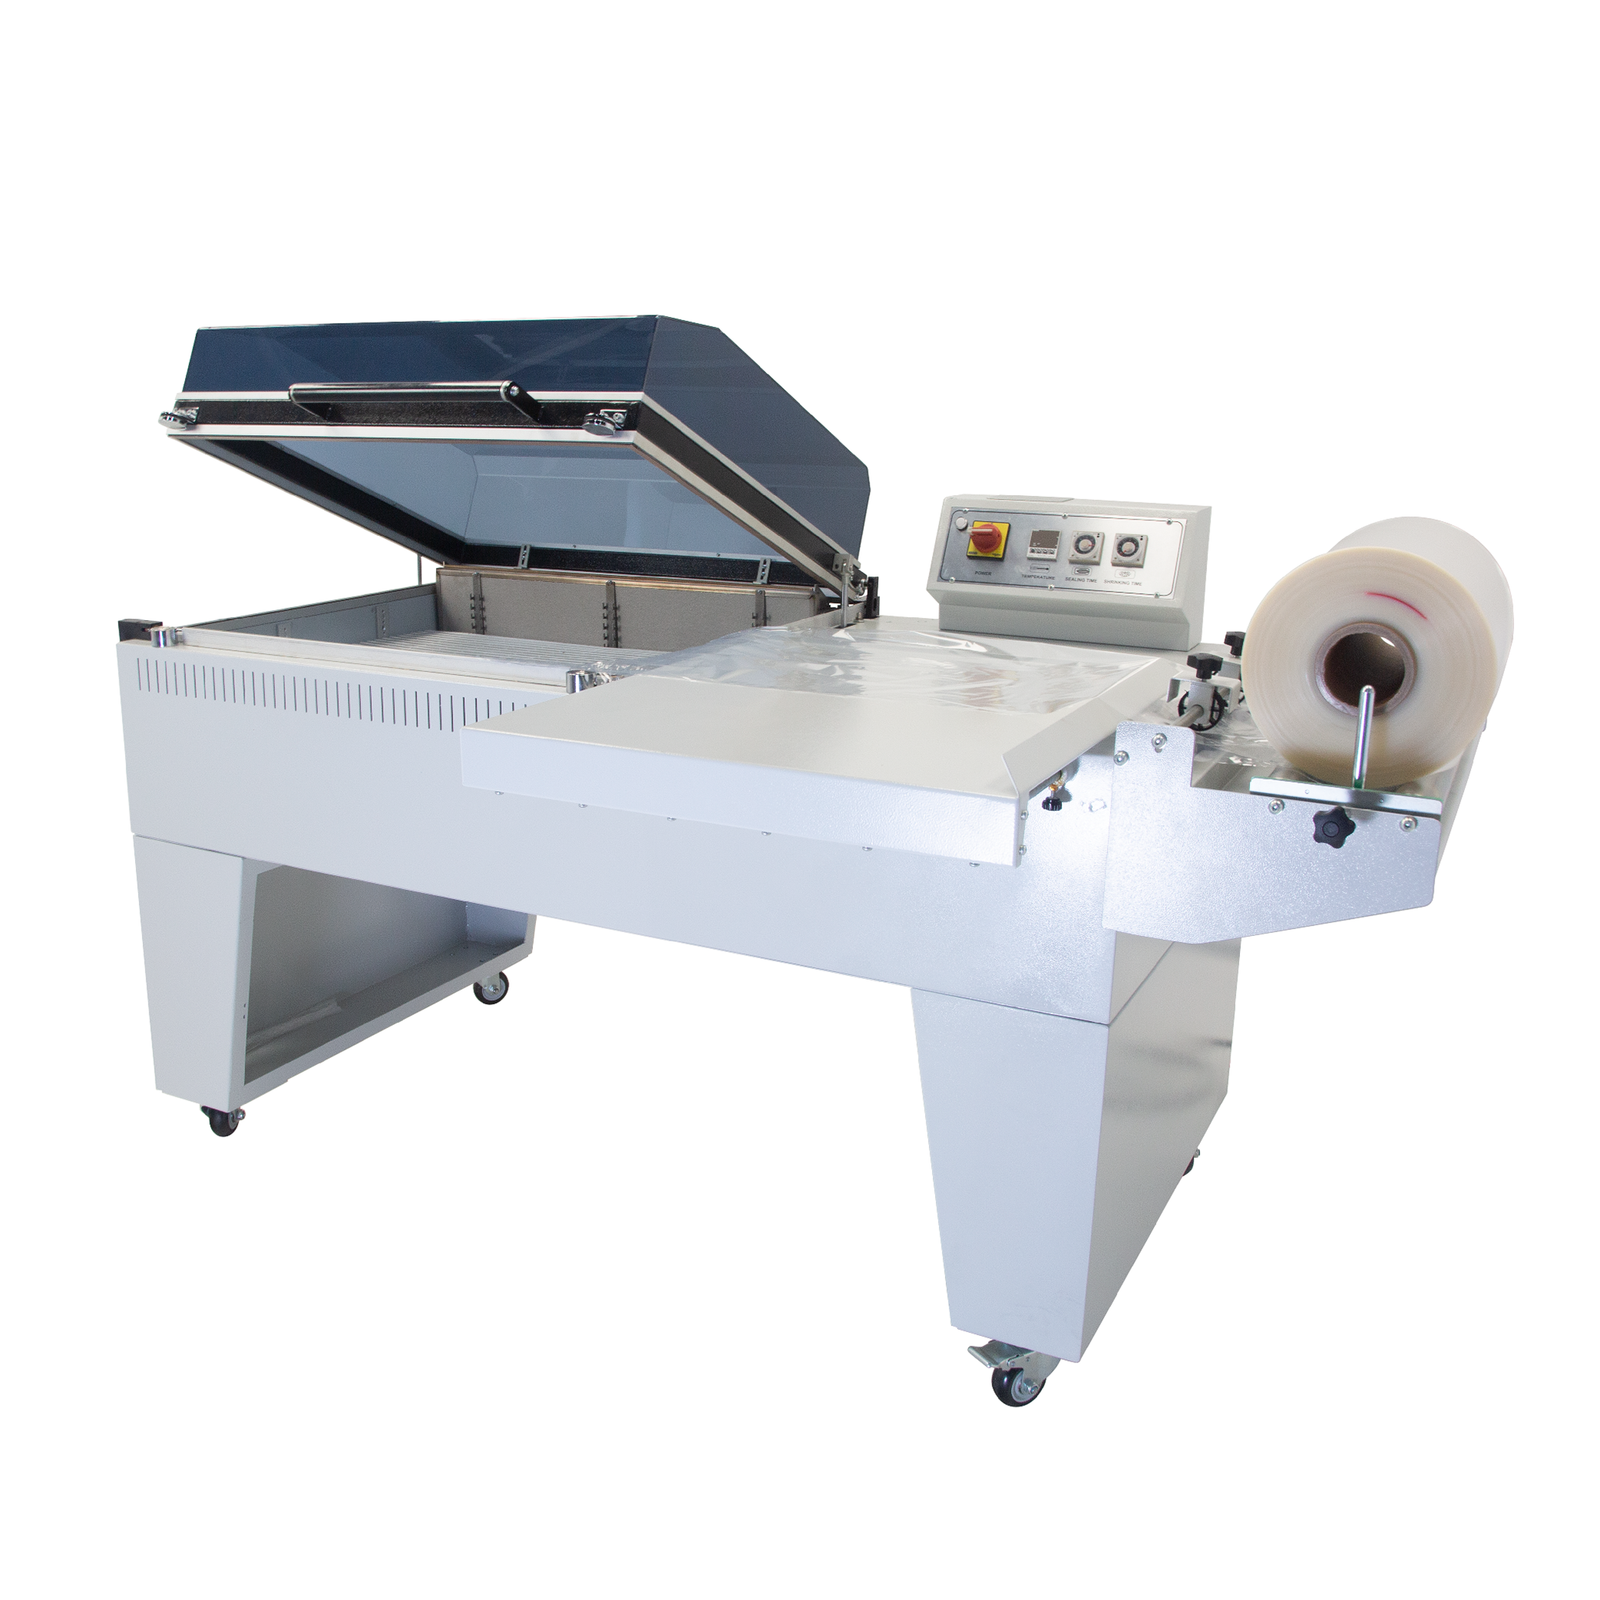 JORESTECH Complete sealing system including shrink roll dispenser, plastic sealer and cutter, and a shrink chamber over a white background.